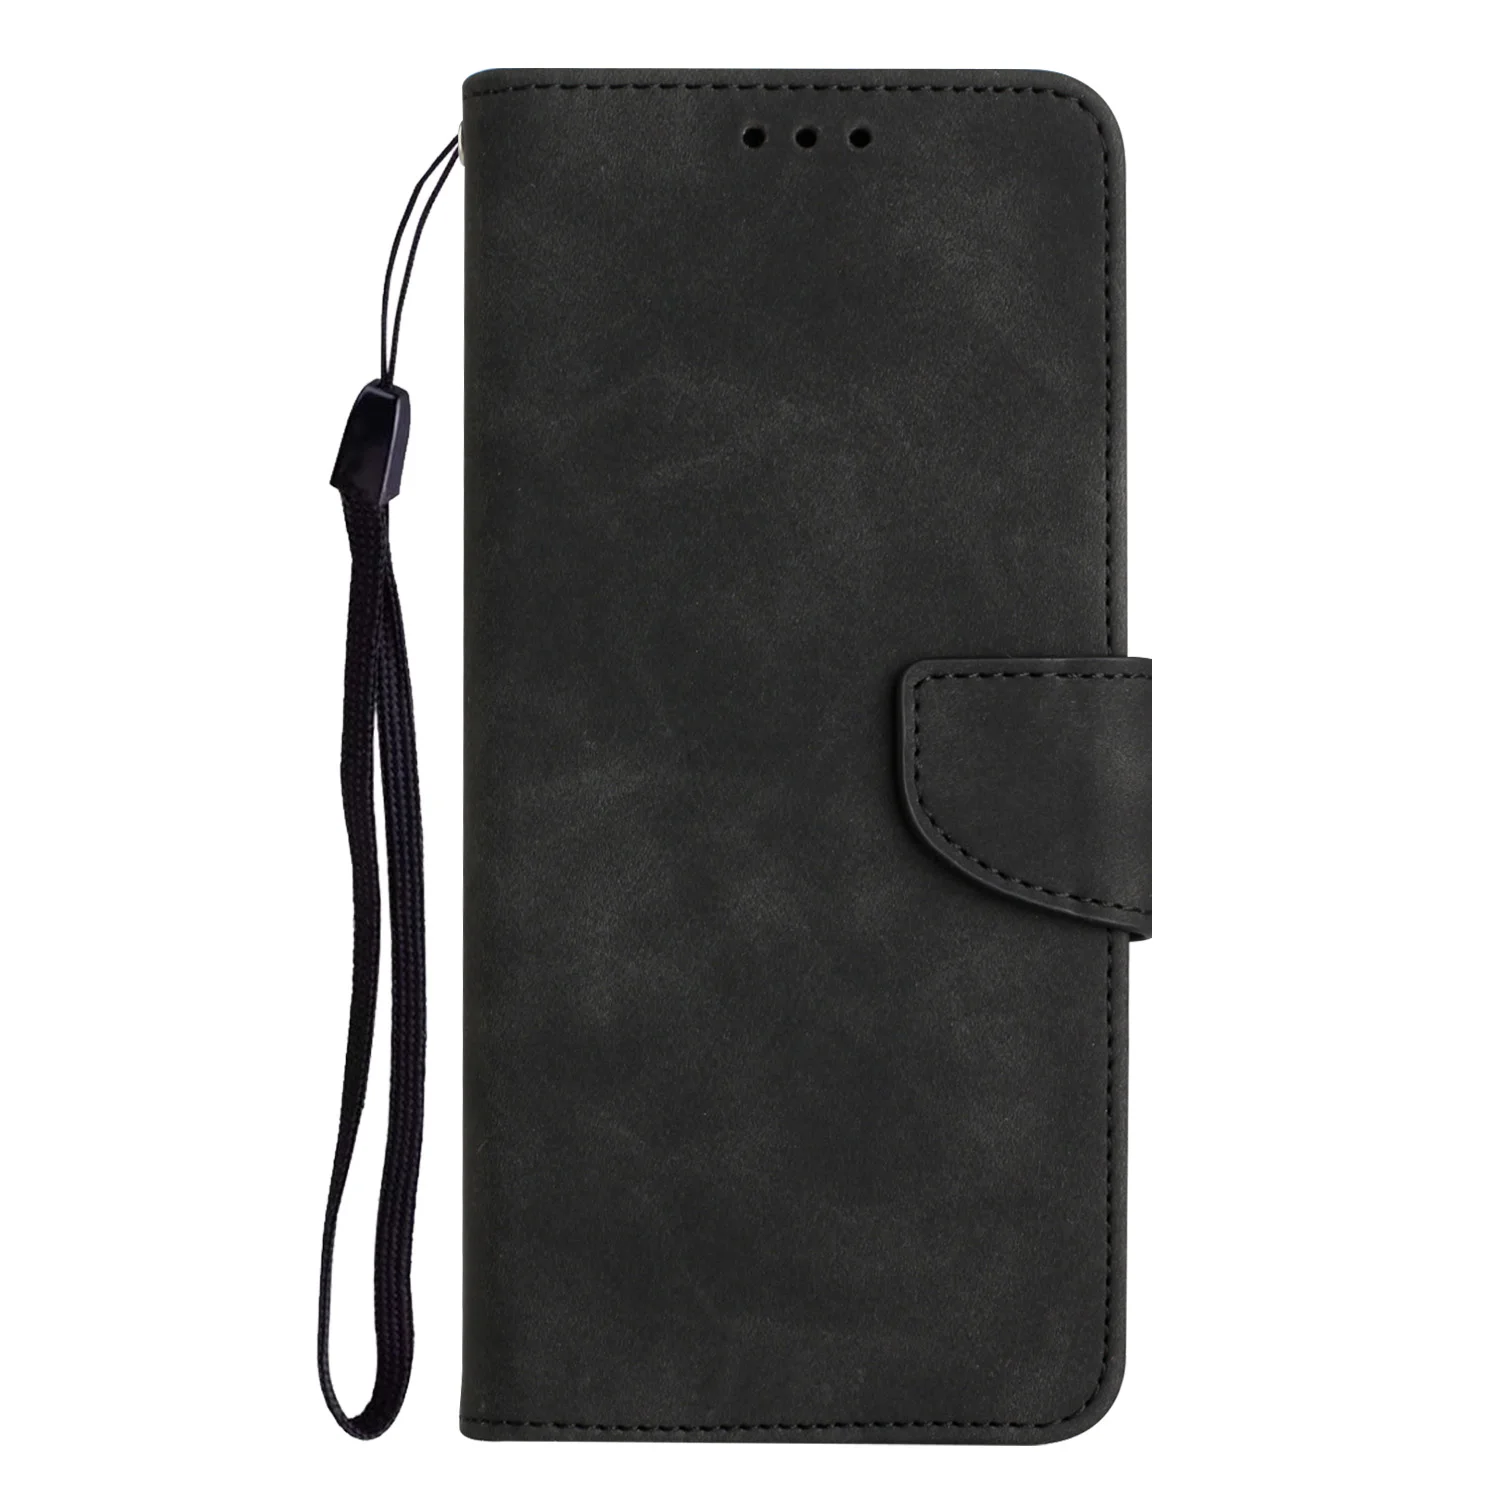 apple iphone 12 mini  case Flip Wallet Case for iPhone 13 Pro Leather Protect Cover For iphone13 12 Mini 11 Pro X XS Max XR 8 7 Plus Funda Card Stand Coque leather iphone 12 mini case iPhone 12 Mini